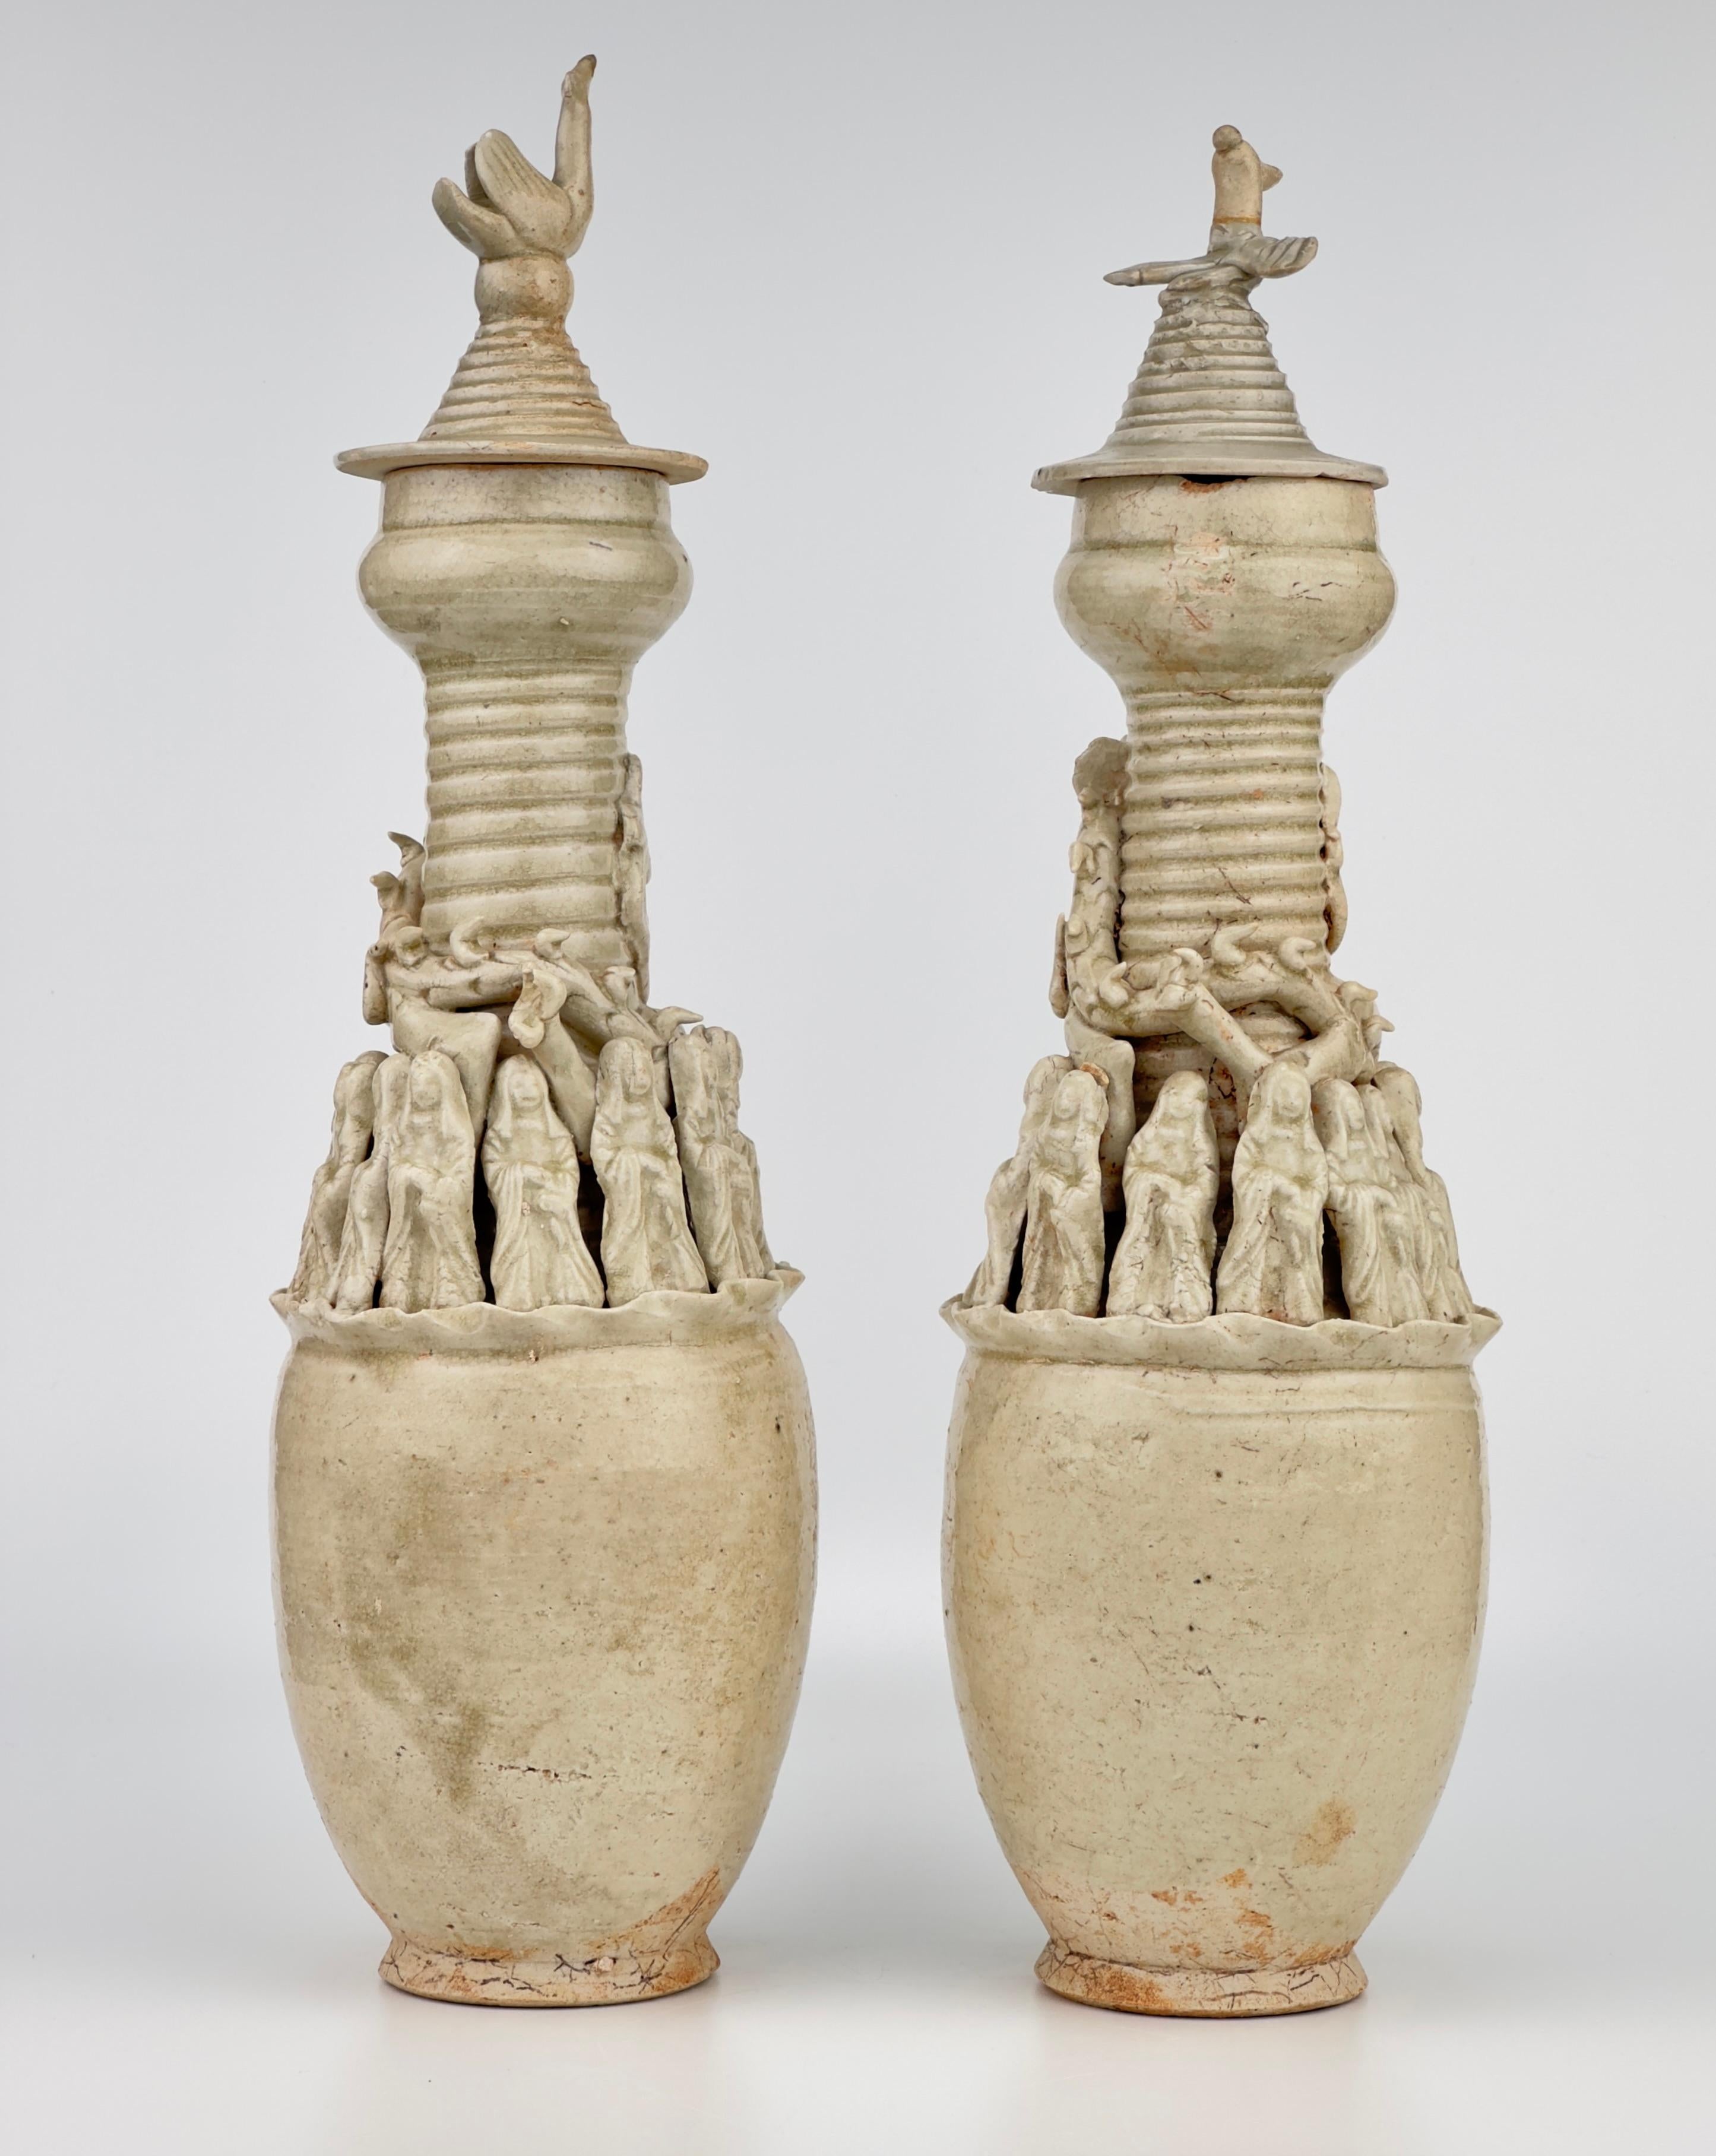 A pair of large Qingbai jars from the Song or Yuan Dynasty, designed for tomb offerings, featuring tall proportions with short bodies and extended necks. These Mingqi jars, typically created in pairs, are noted for their diverse decorations and